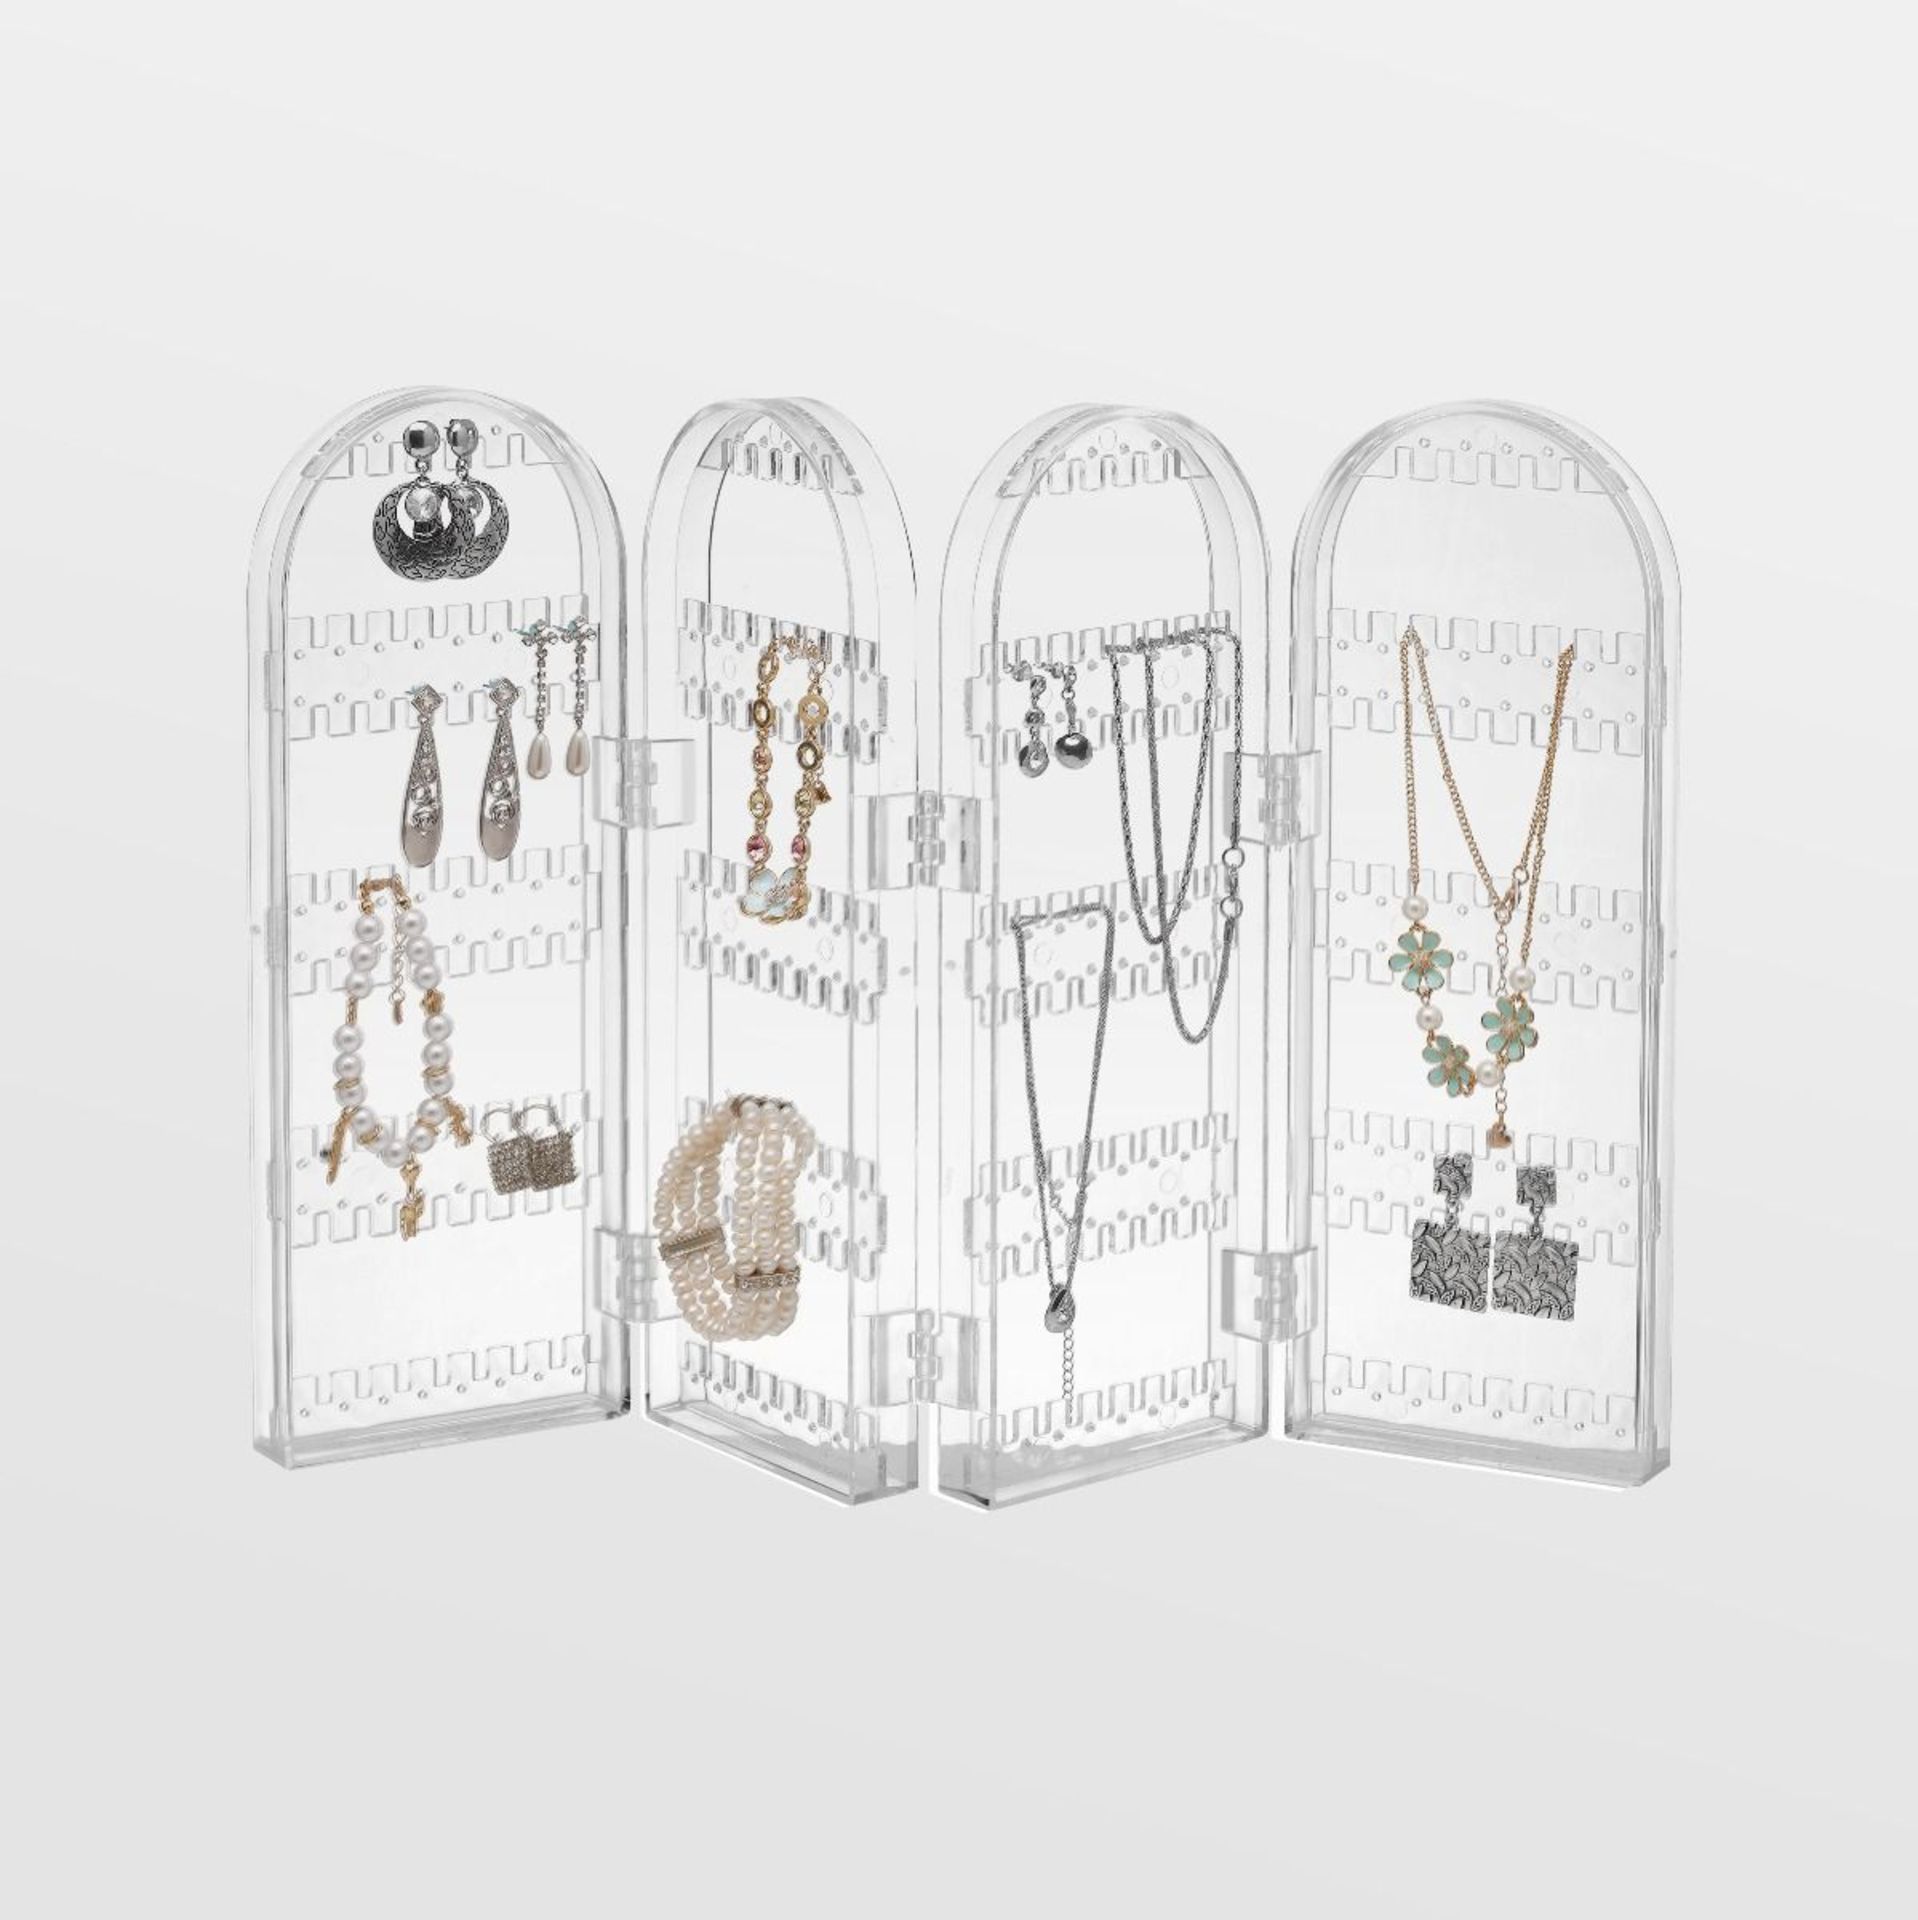 Foldable Jewellery Hanger. - BI. This useful hanger offers space for 260 earrings (130 pairs) more